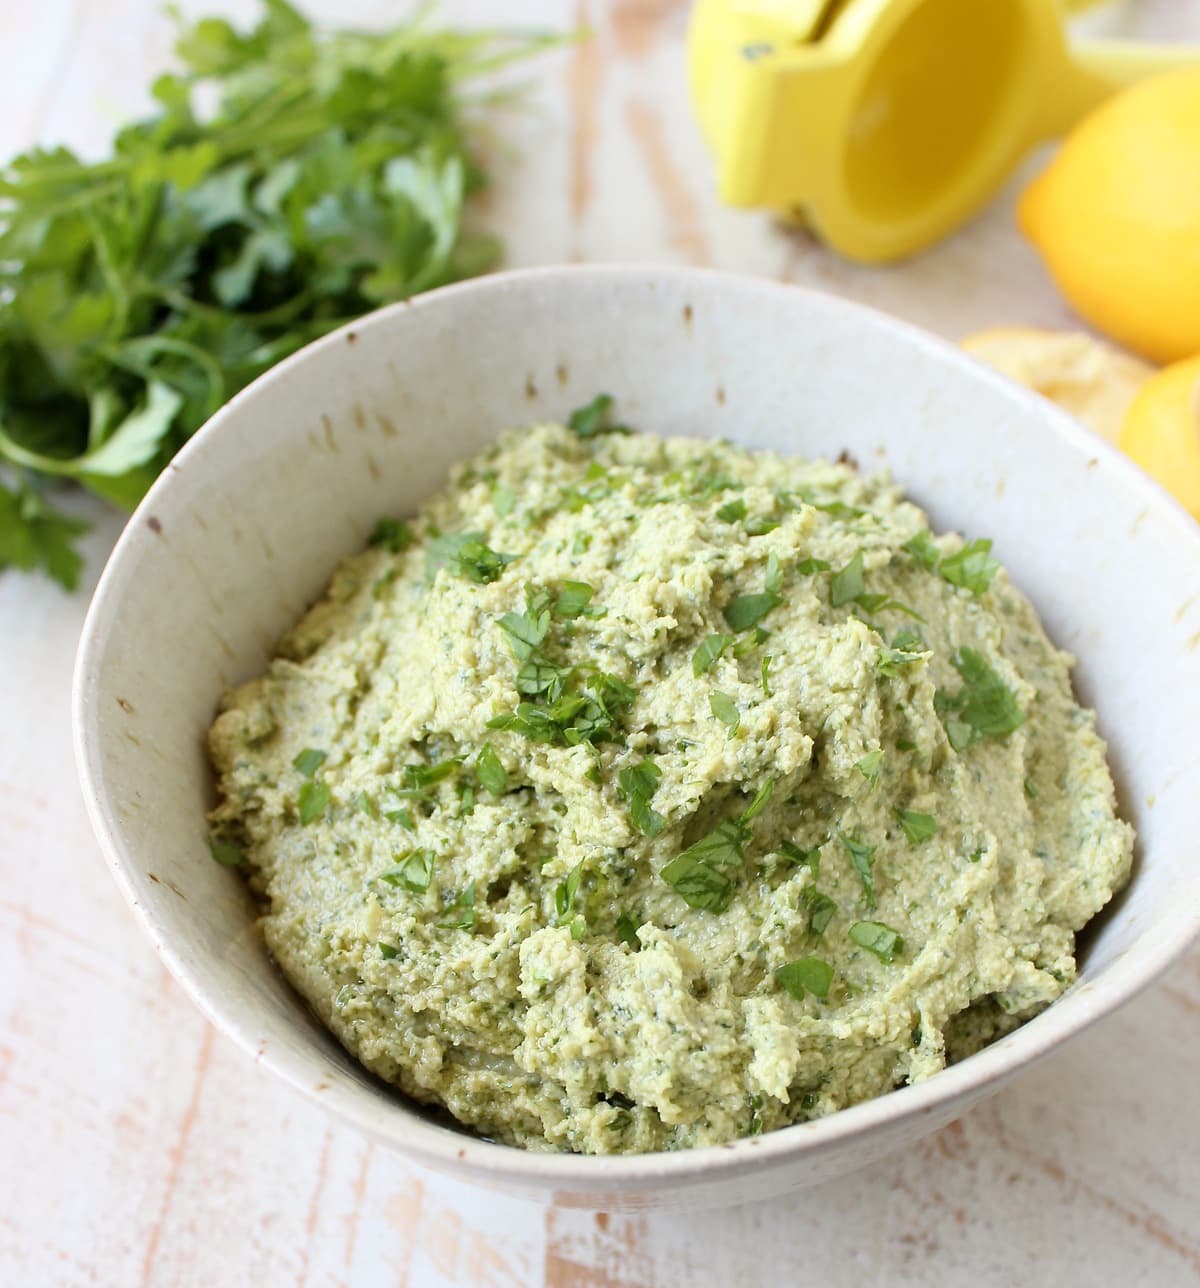 This healthy, vegan and gluten free Green Tahini Sauce Recipe is perfect for topping buddha bowls, chicken and fish, or serve it as a dip with veggies!